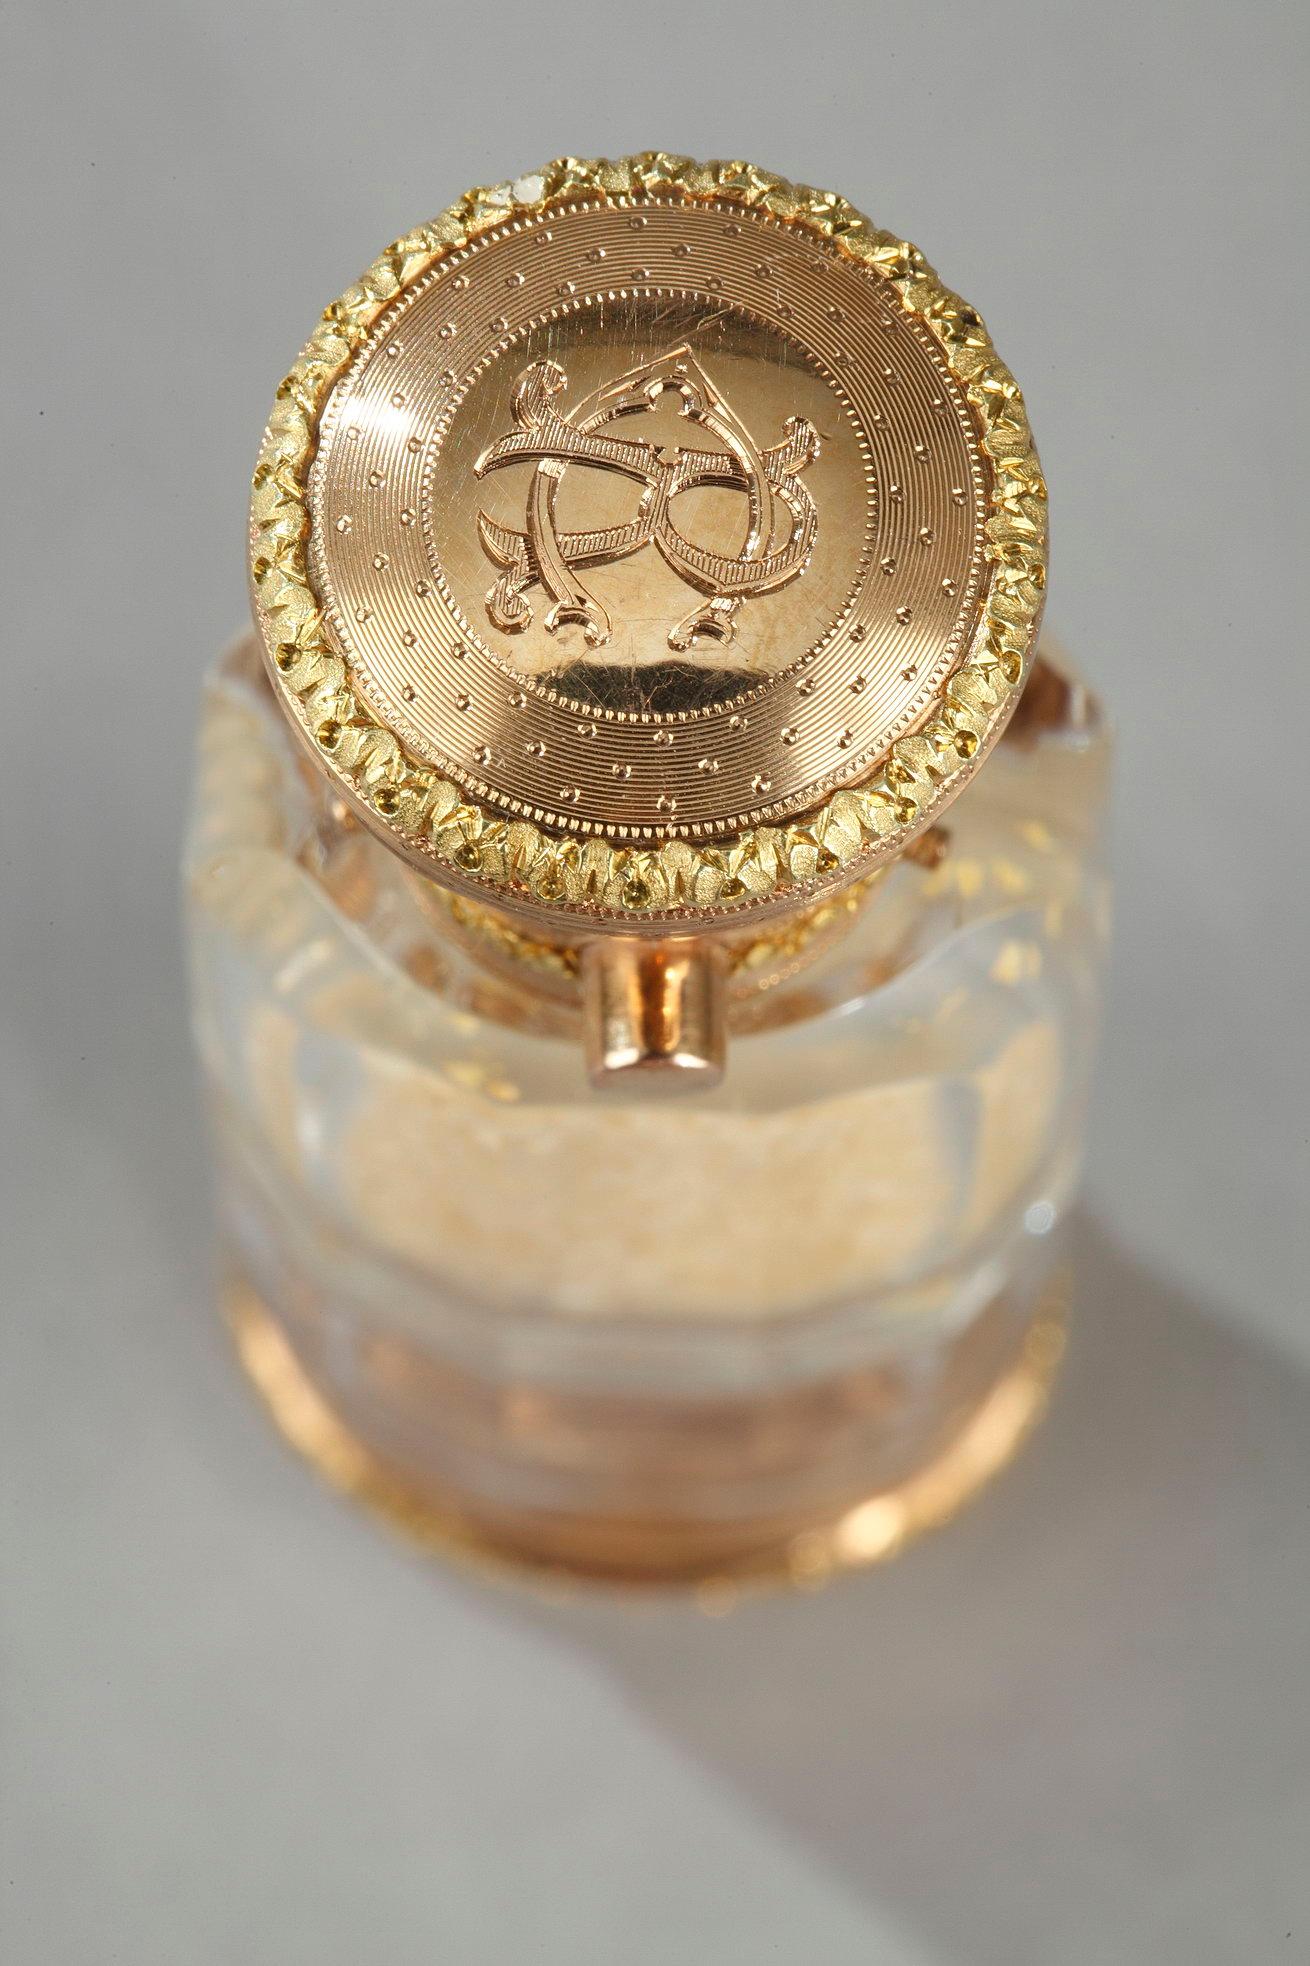 A cylindrical, double-ended transparent crystal perfume bottle with one side  a fine vinaigrette and the other a smelling salt compartiment. The vinaigrette opens a pierced grid still containing its sponge soaked in flavored vinegar. The gold